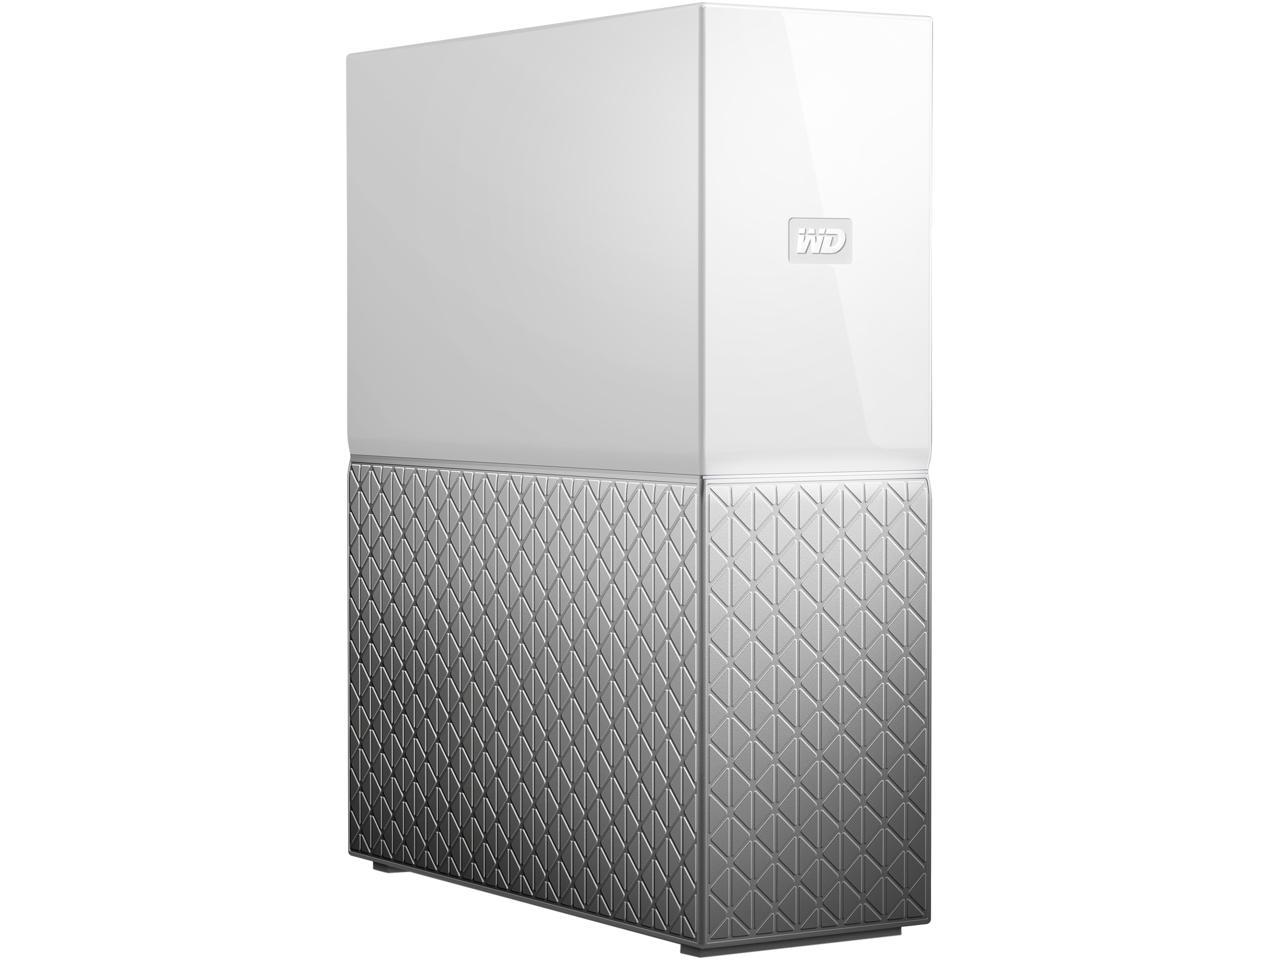 WD 4TB MY Personal Home Cloud Single Drive